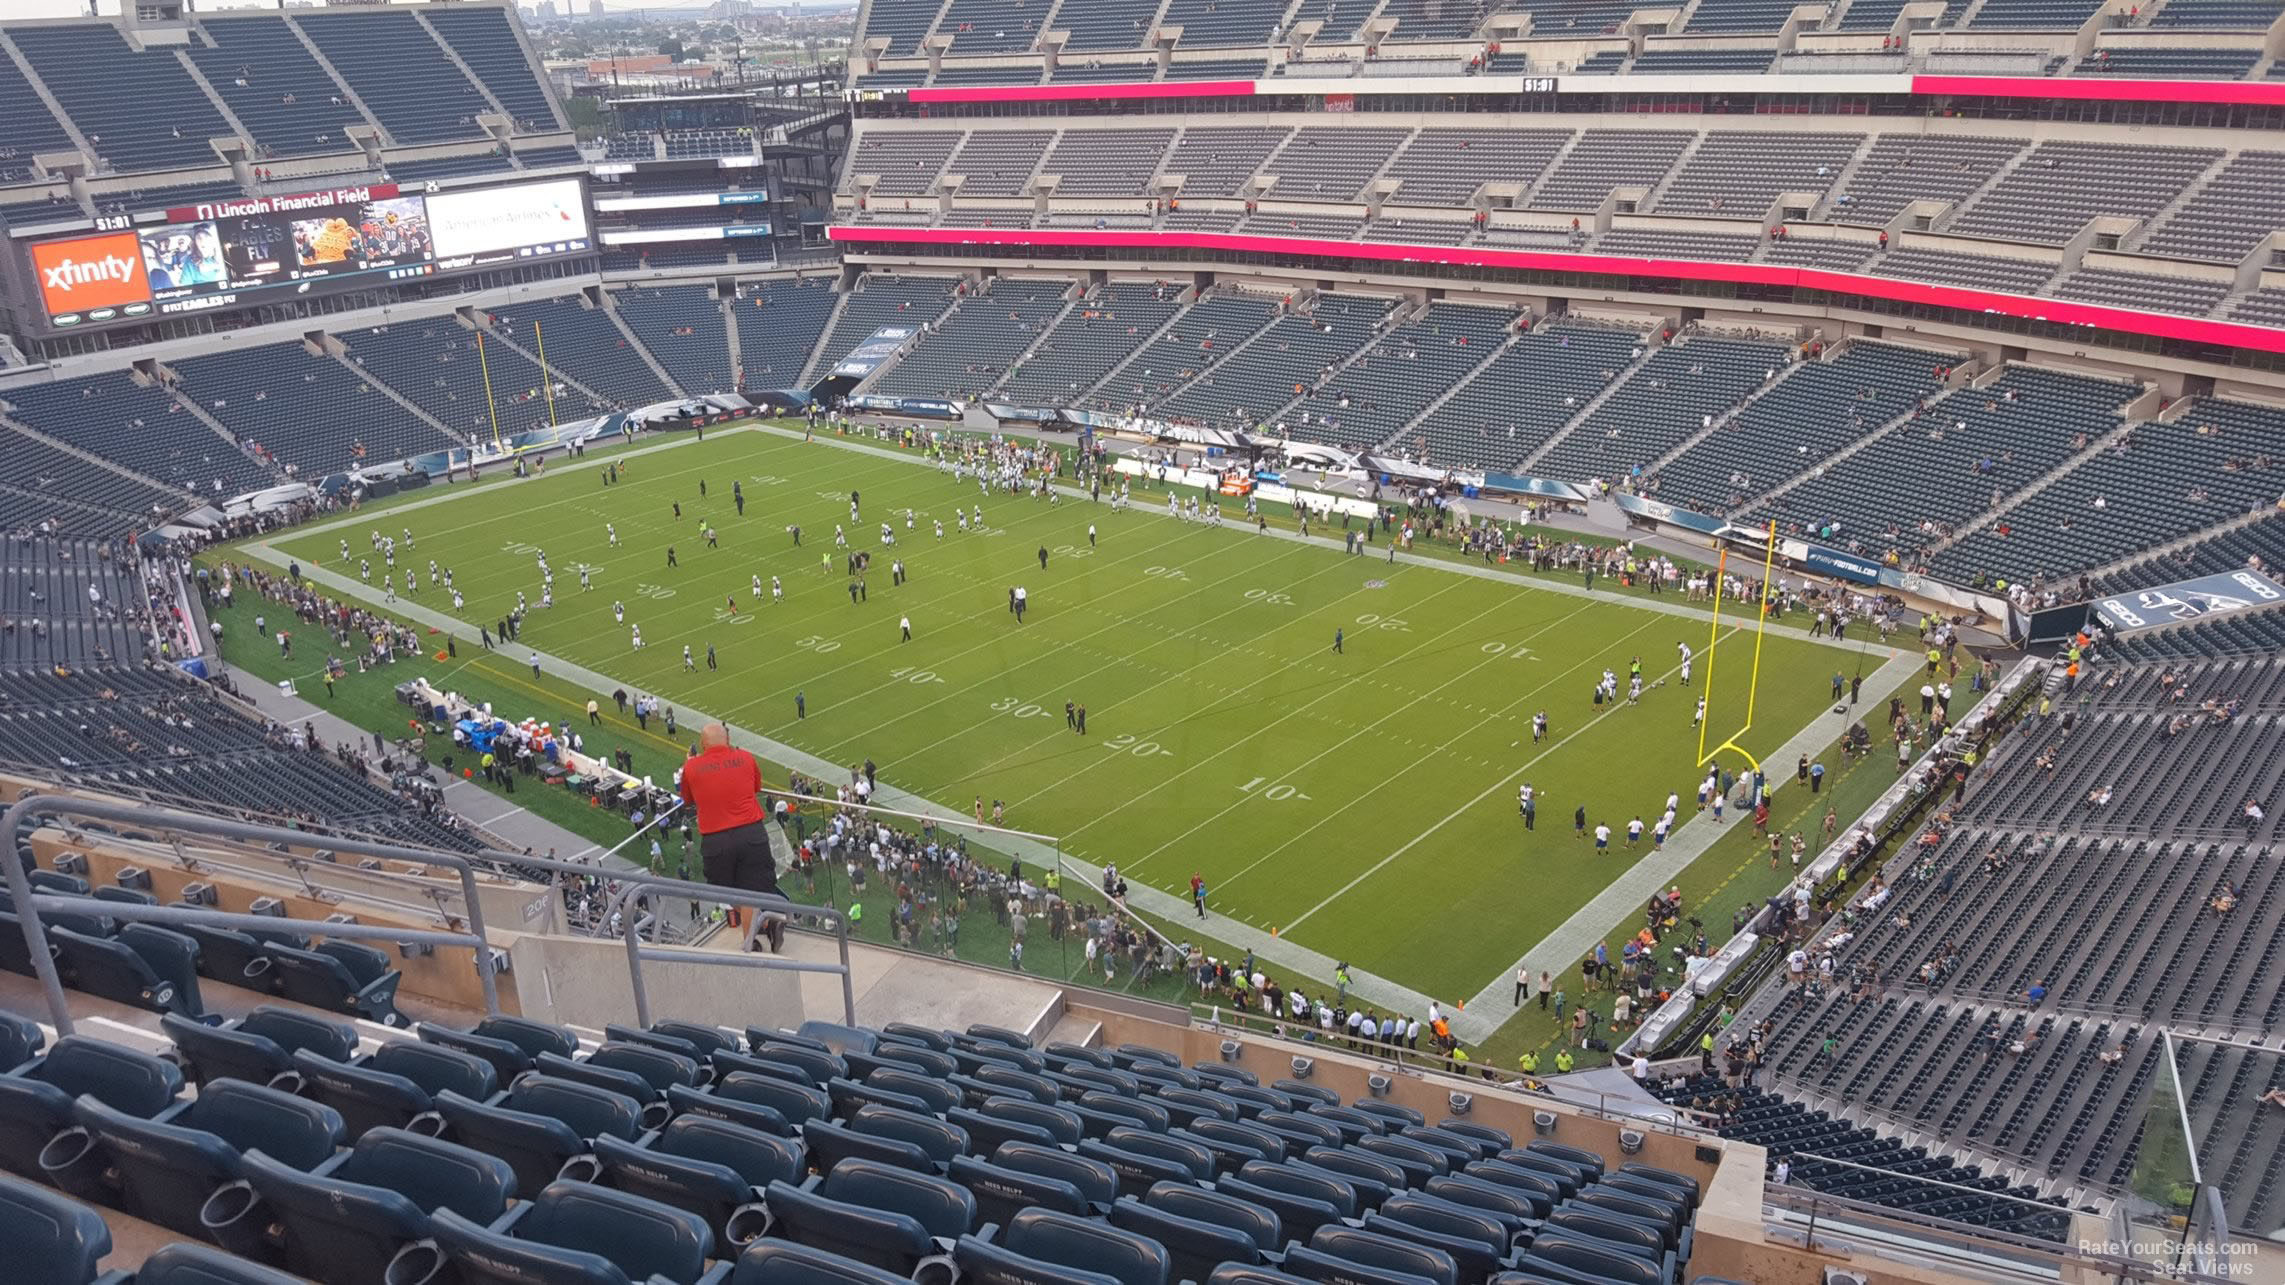 section 207, row 15 seat view  for football - lincoln financial field